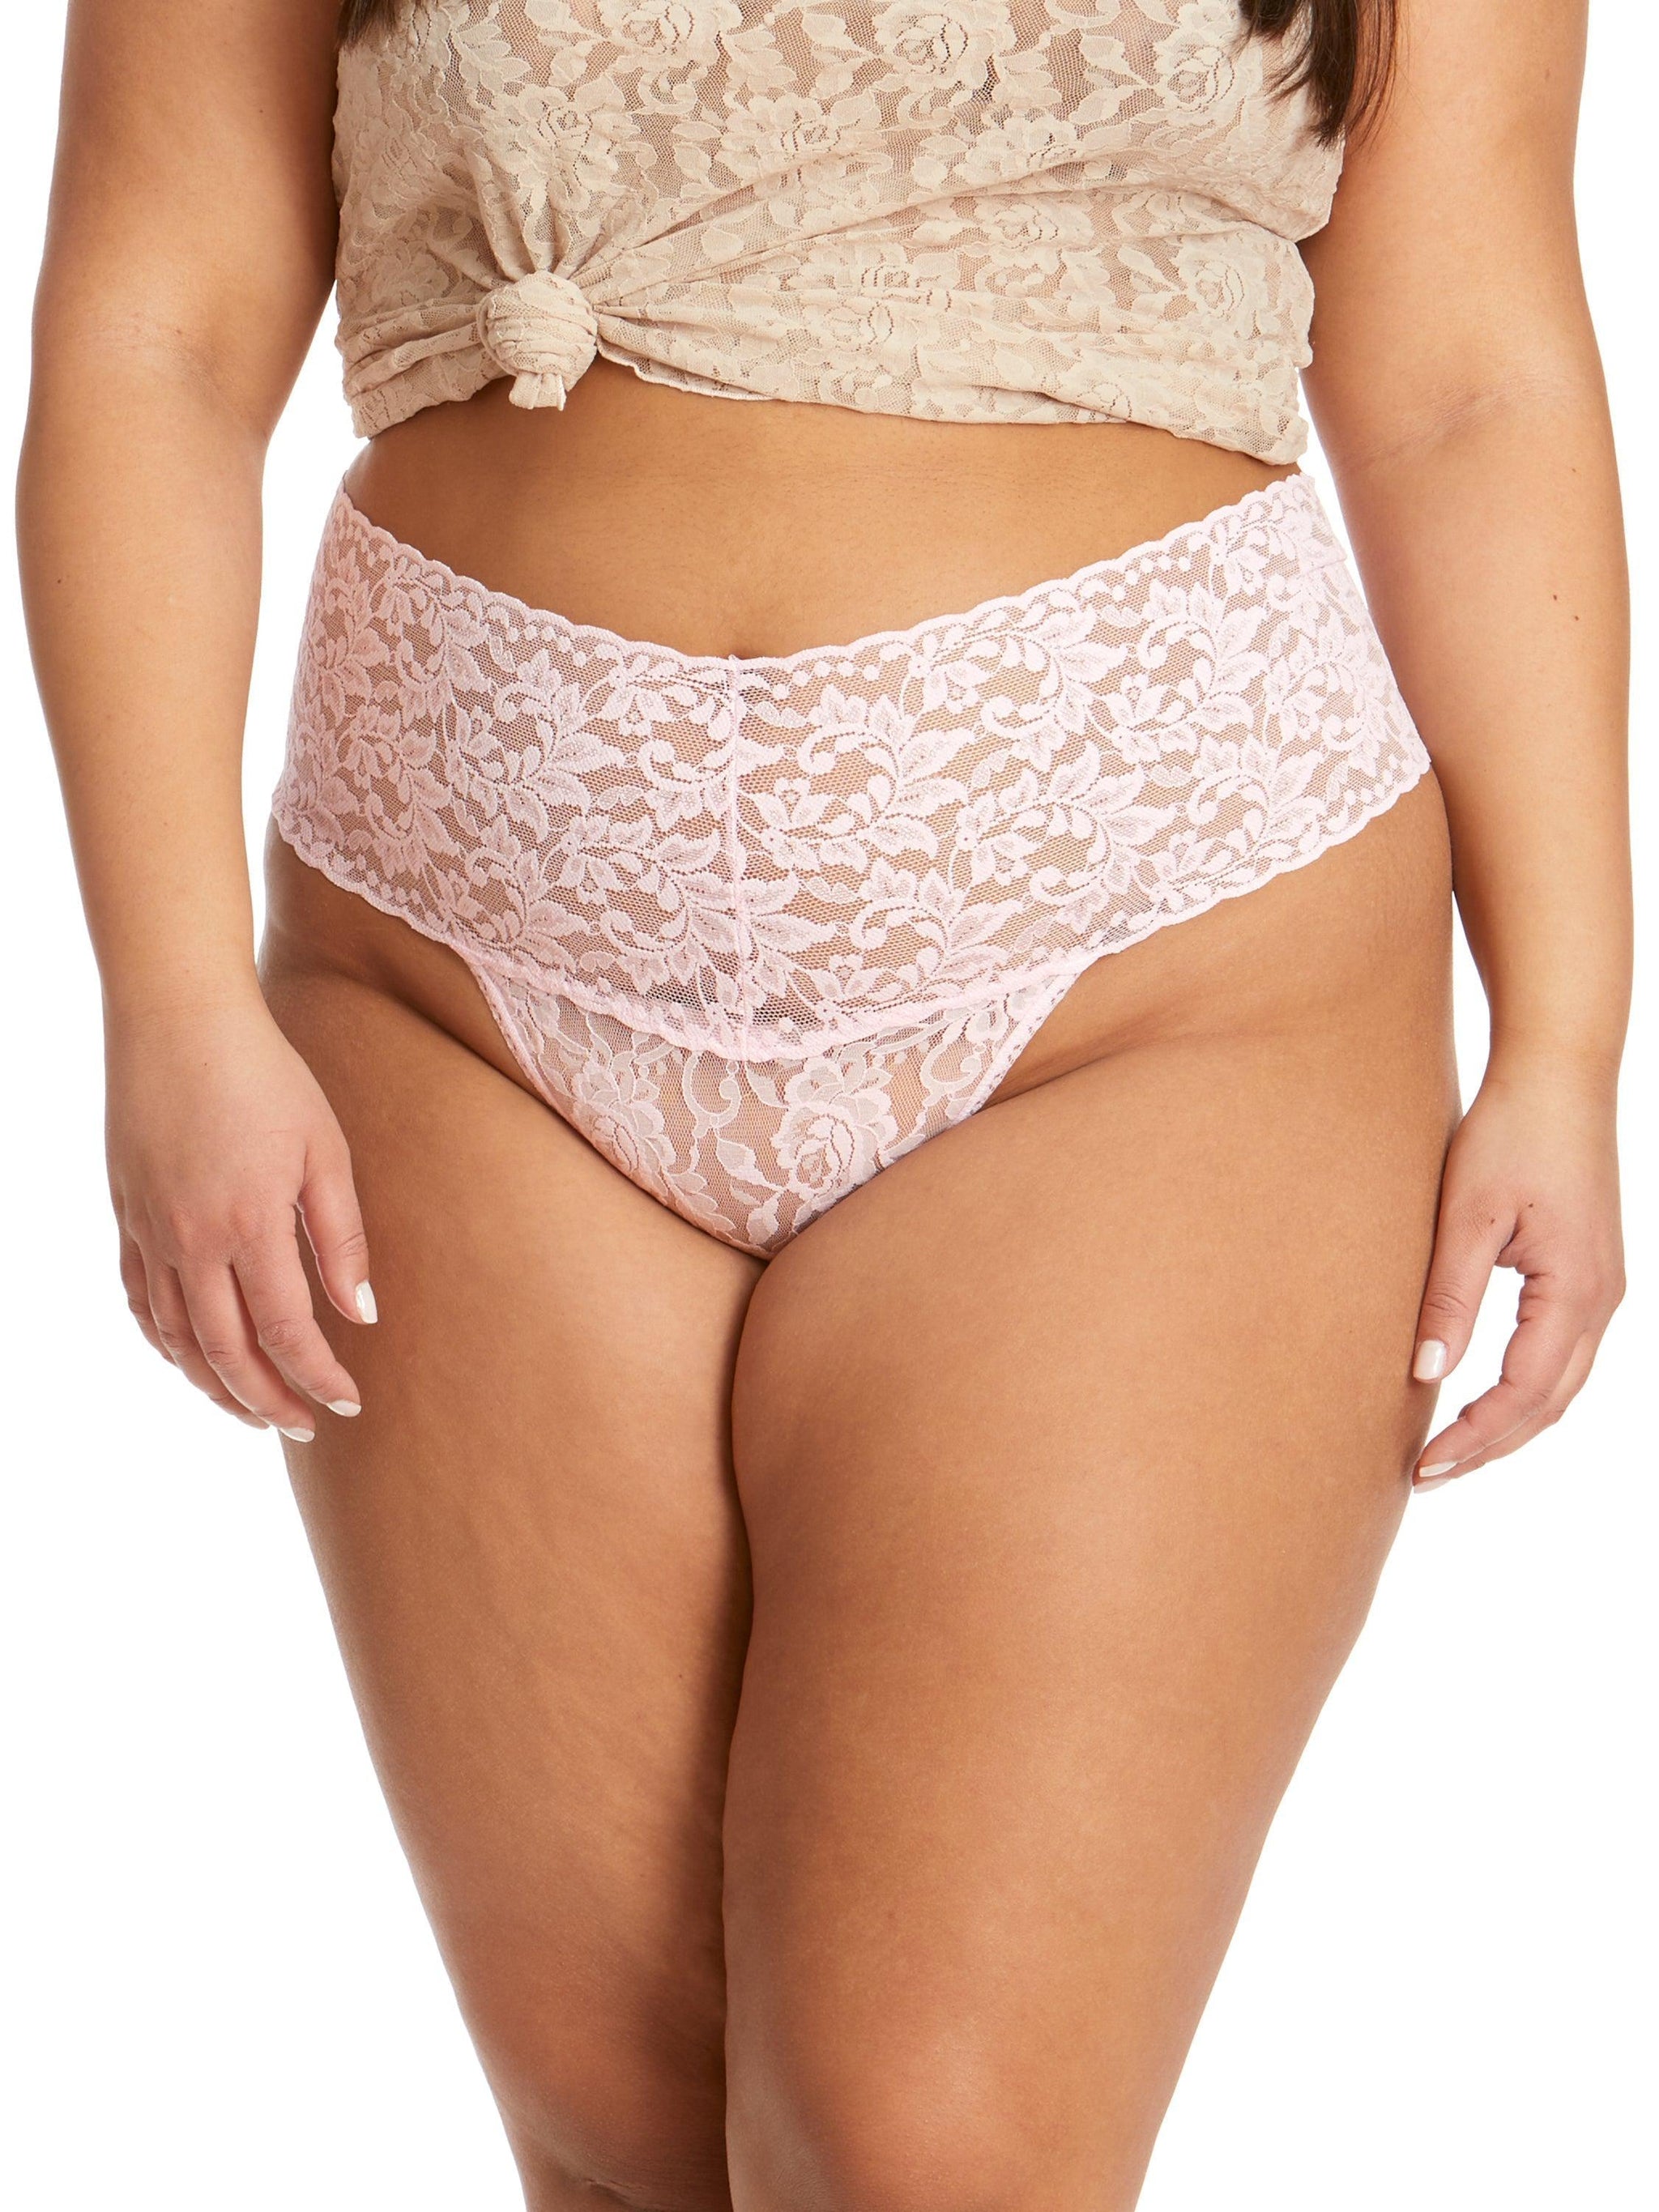 Plus Size Retro Lace Thong Bliss Pink